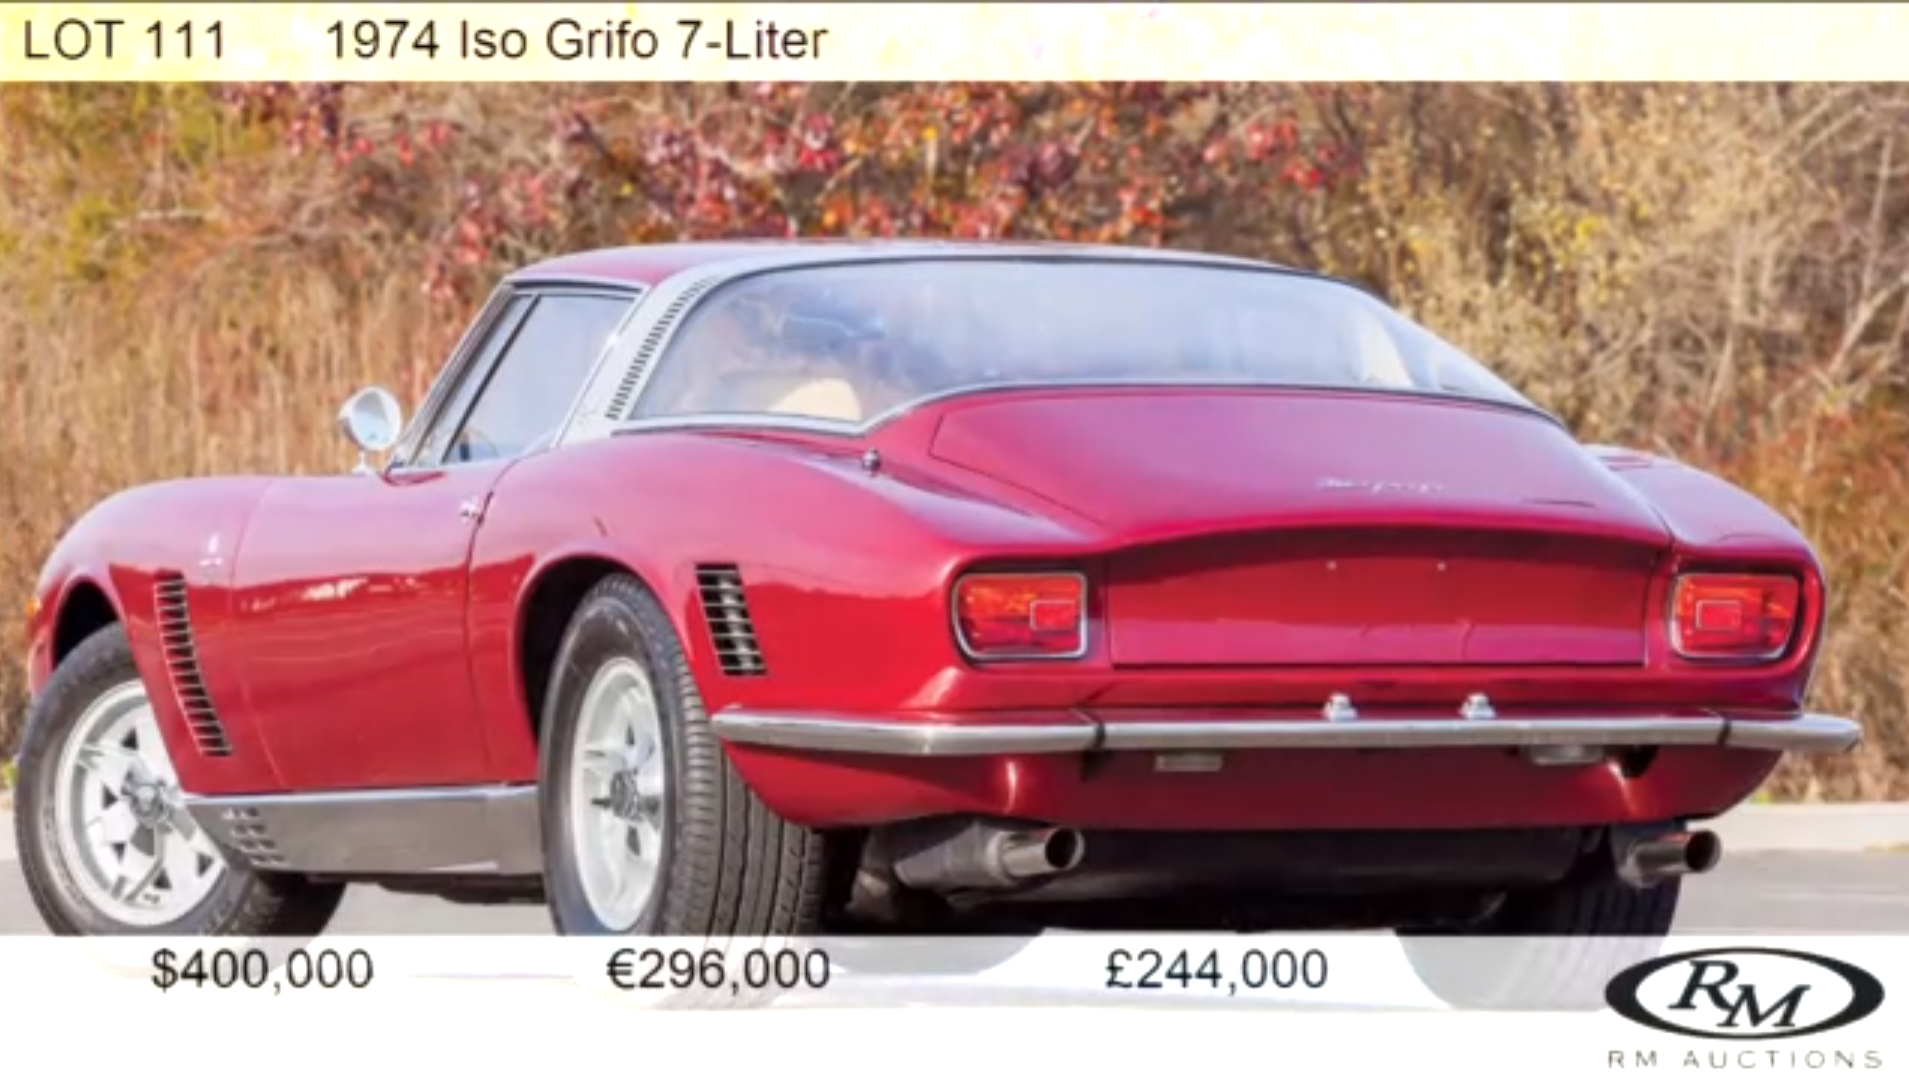 Iso Grifo No. 413 Sets A World Record Price